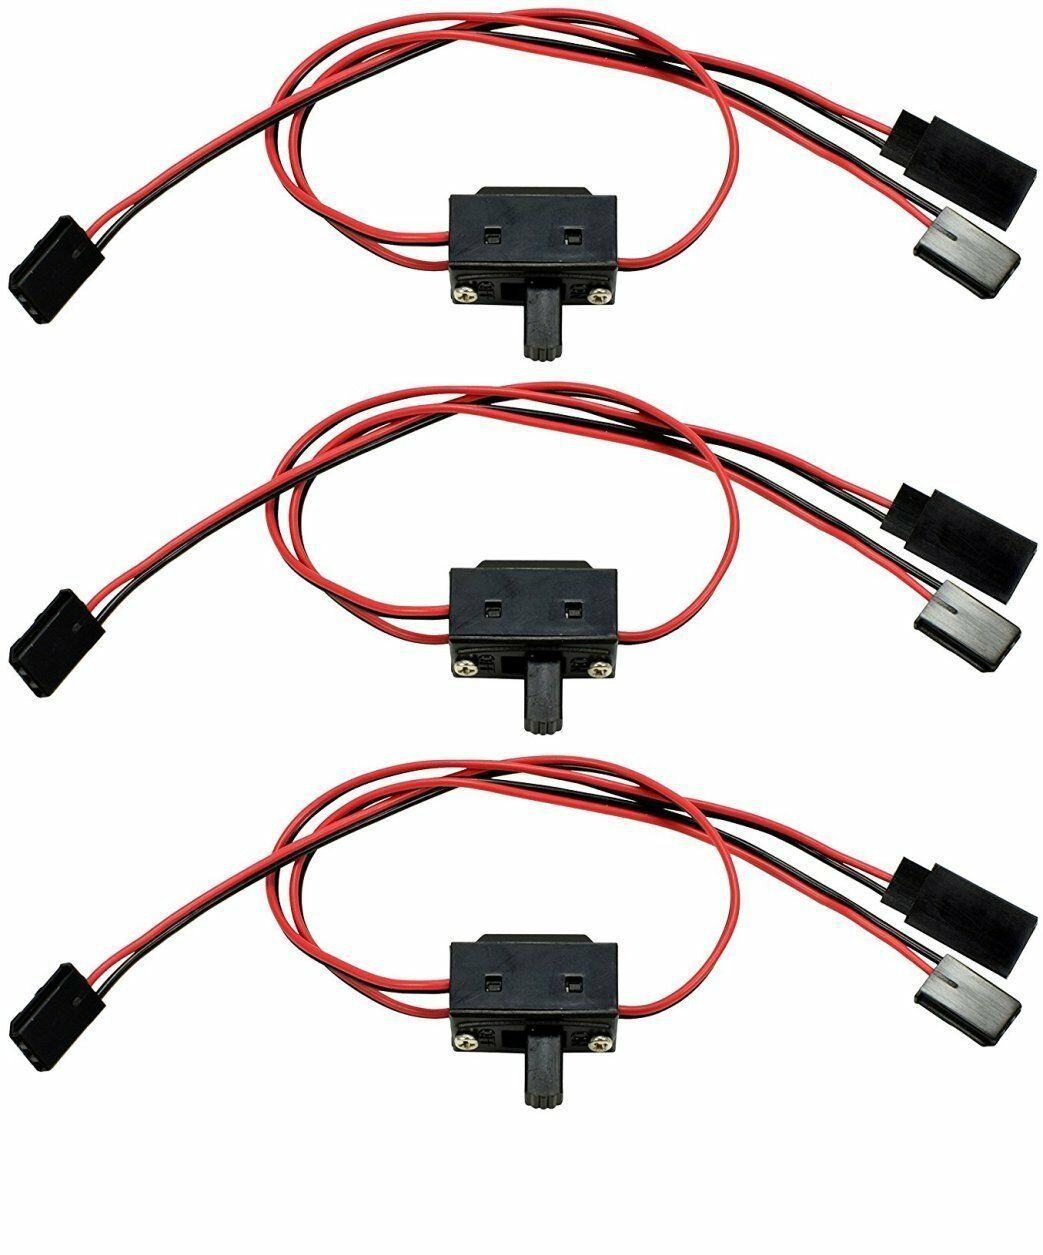 Apex Rc Products Futaba Style 3 Way On/off Switch W/ Charge Lead -3 Pack #1055